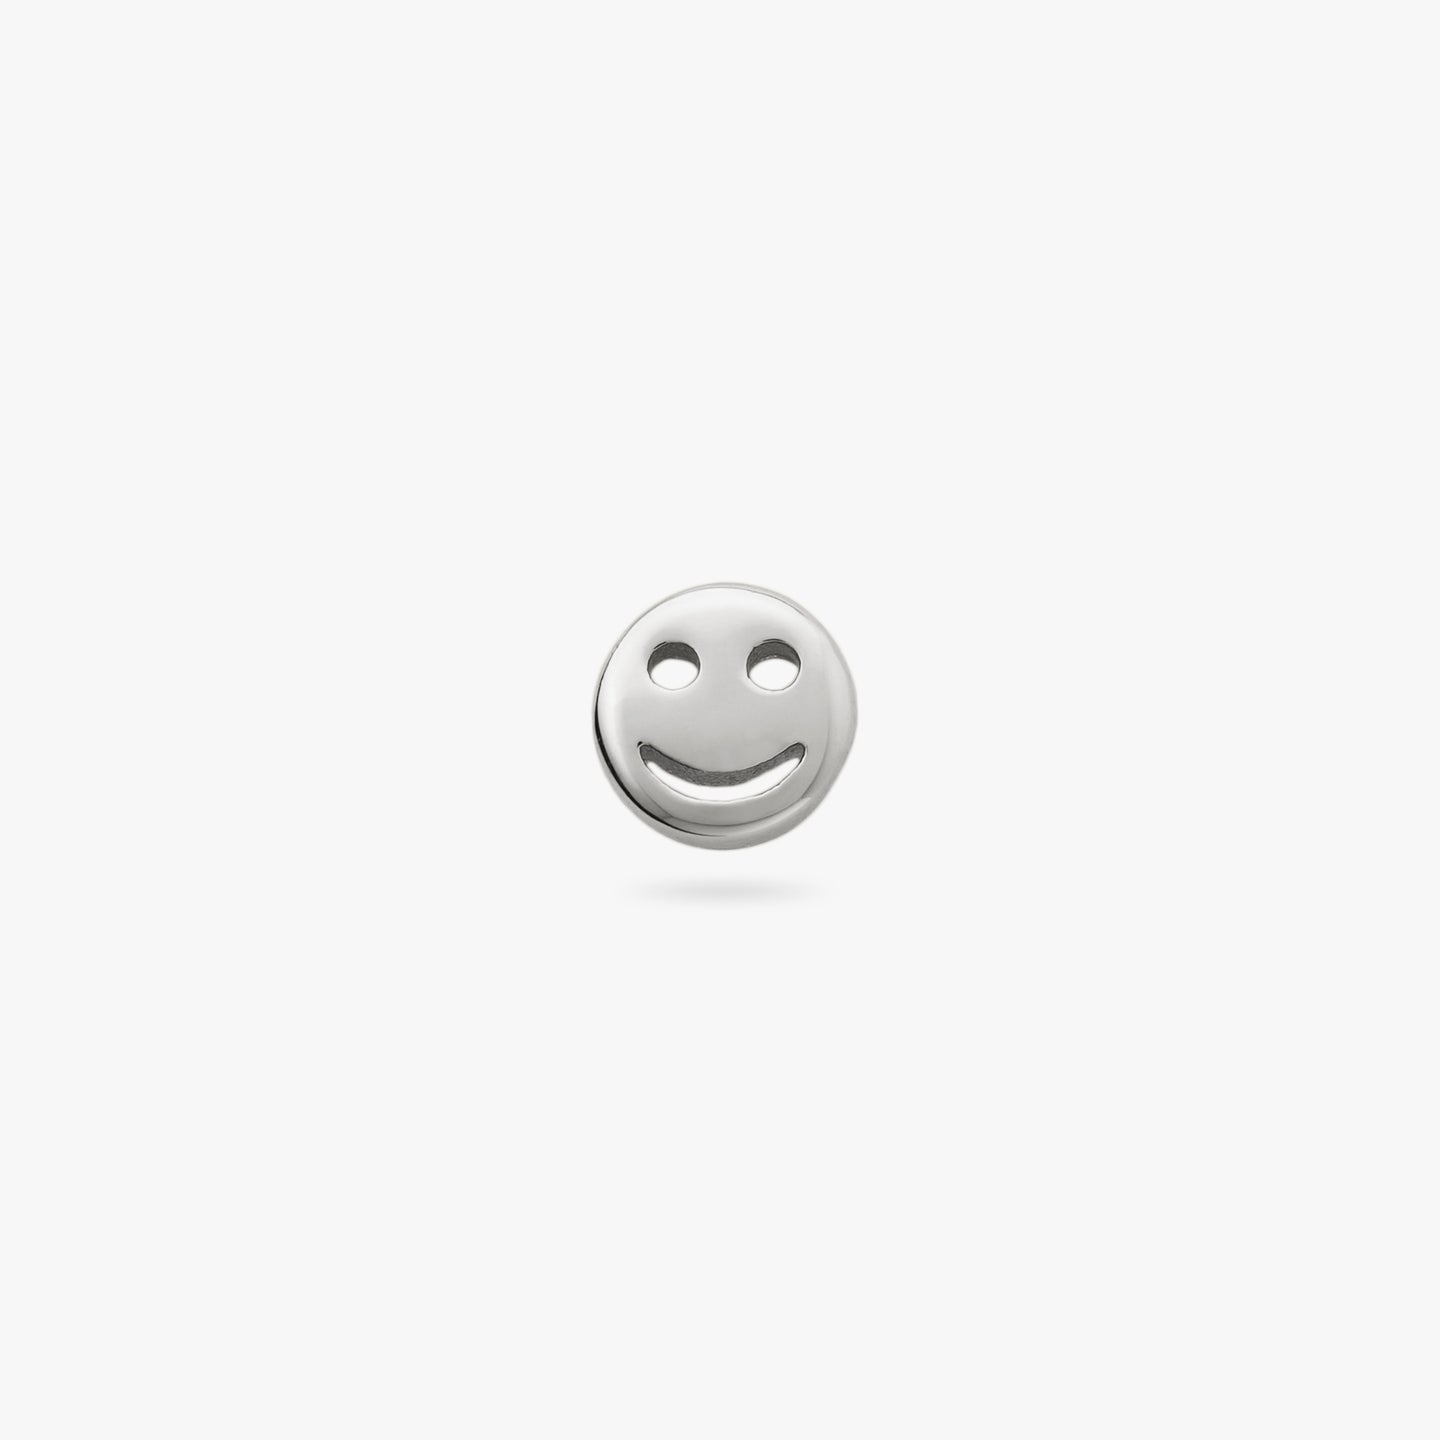 This is a small silver smiley face stud color:null|silver